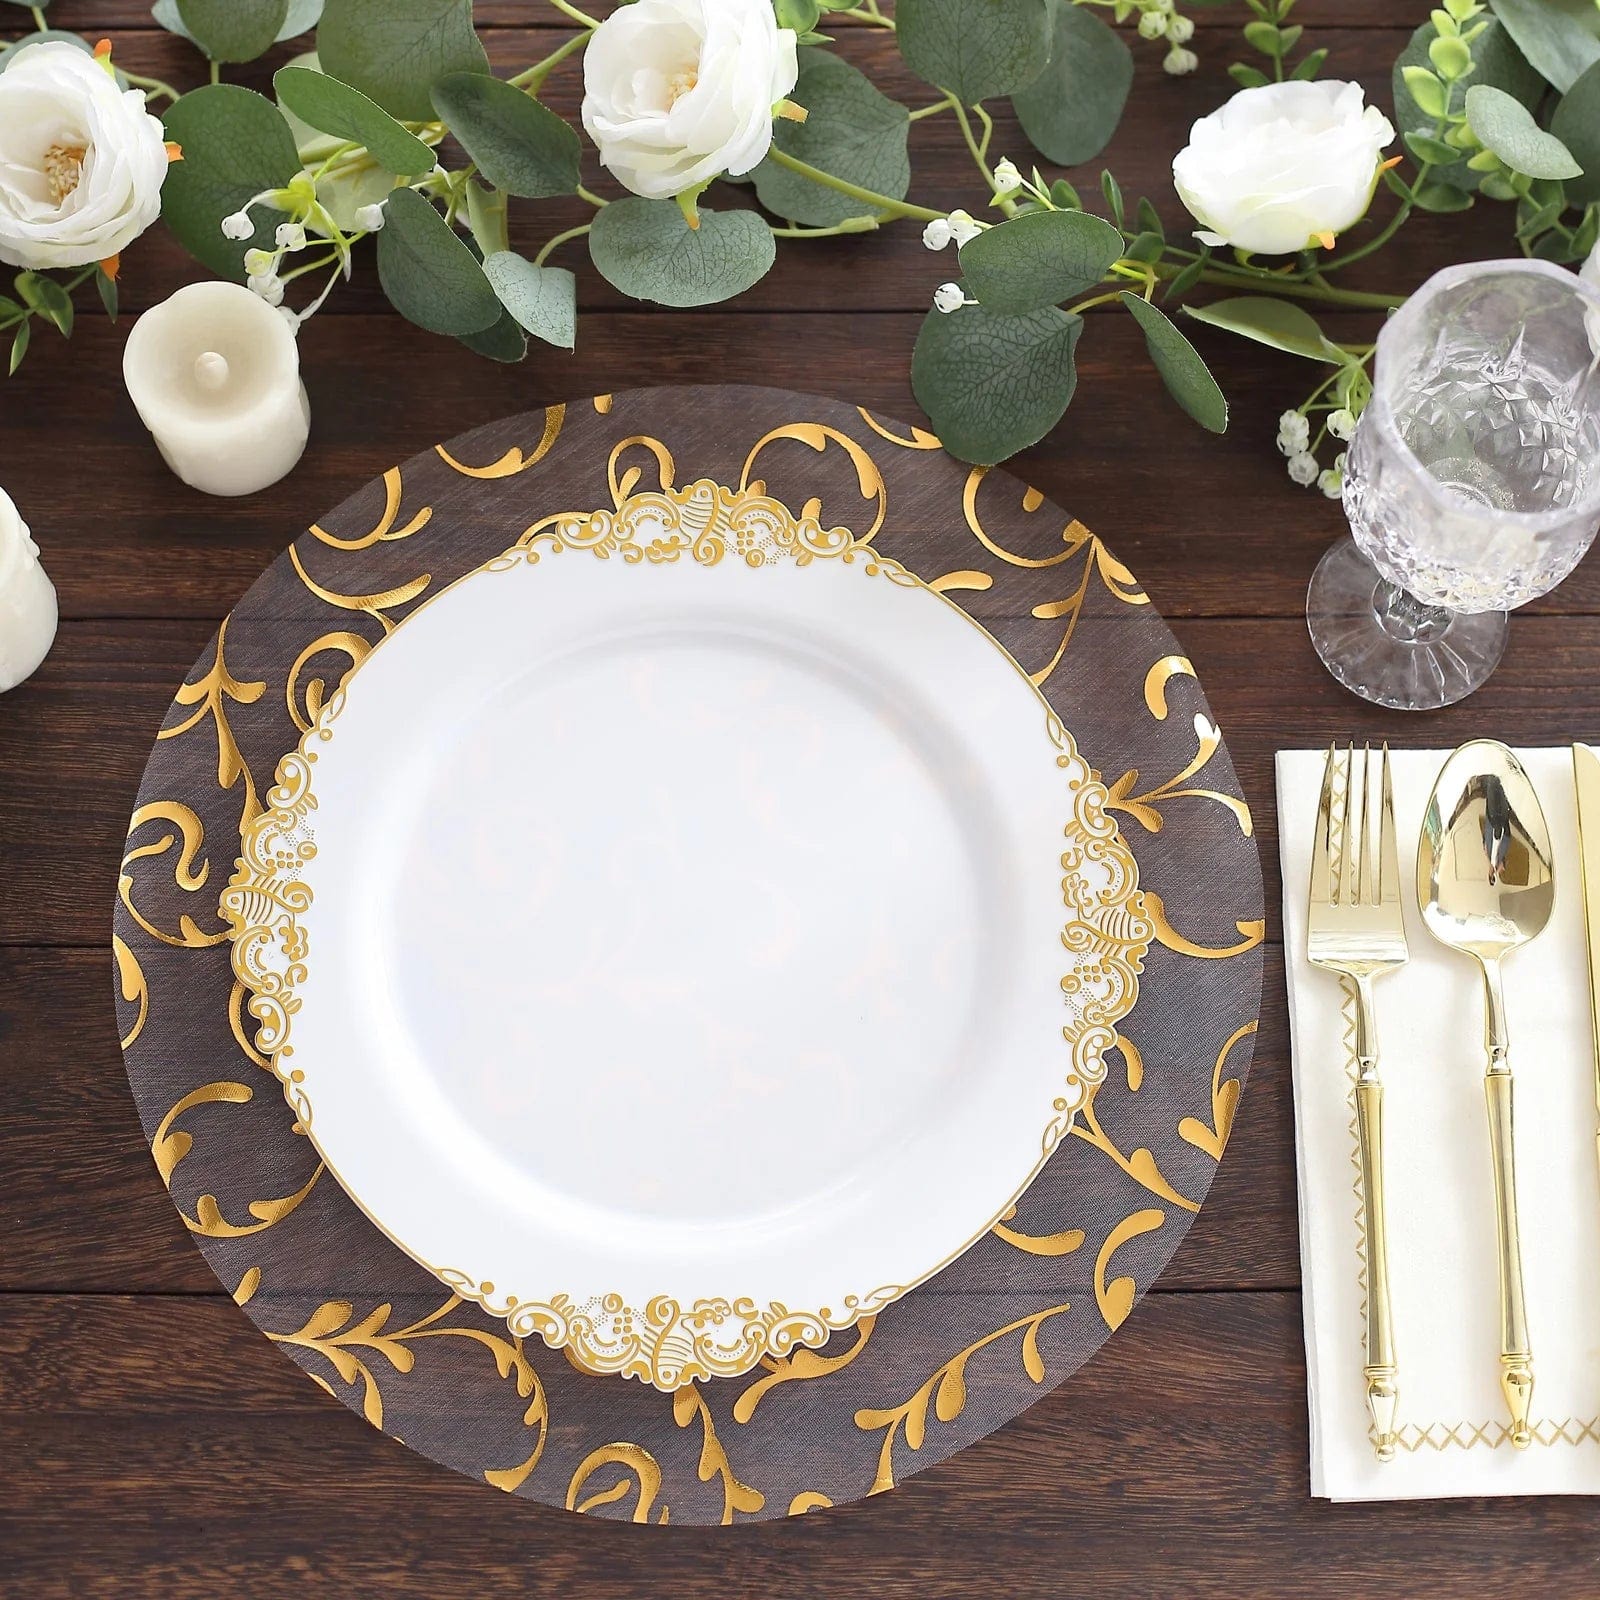 10 Round 13 in Sheer Organza Placemats with Metallic Embossed Floral Design